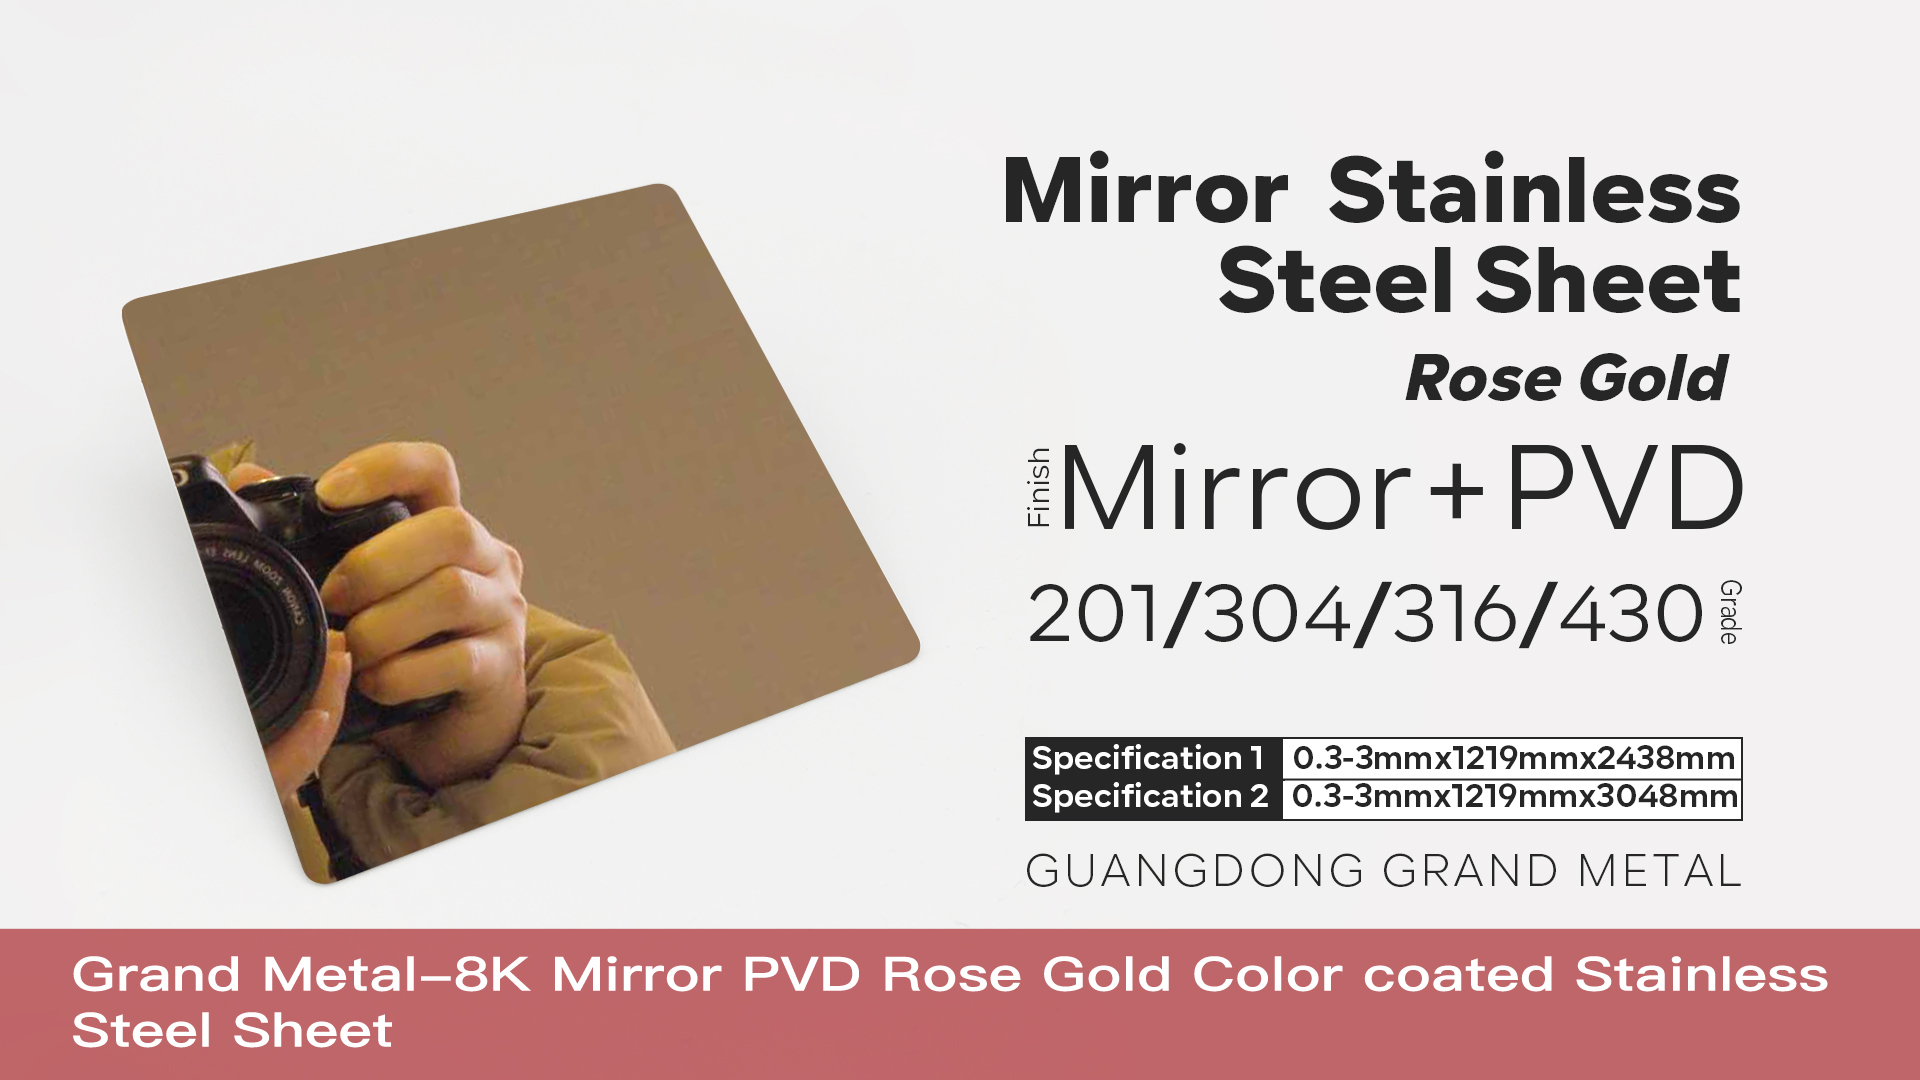 8K Mirror PVD Rose Gold Colored Stainless Steel Sheet